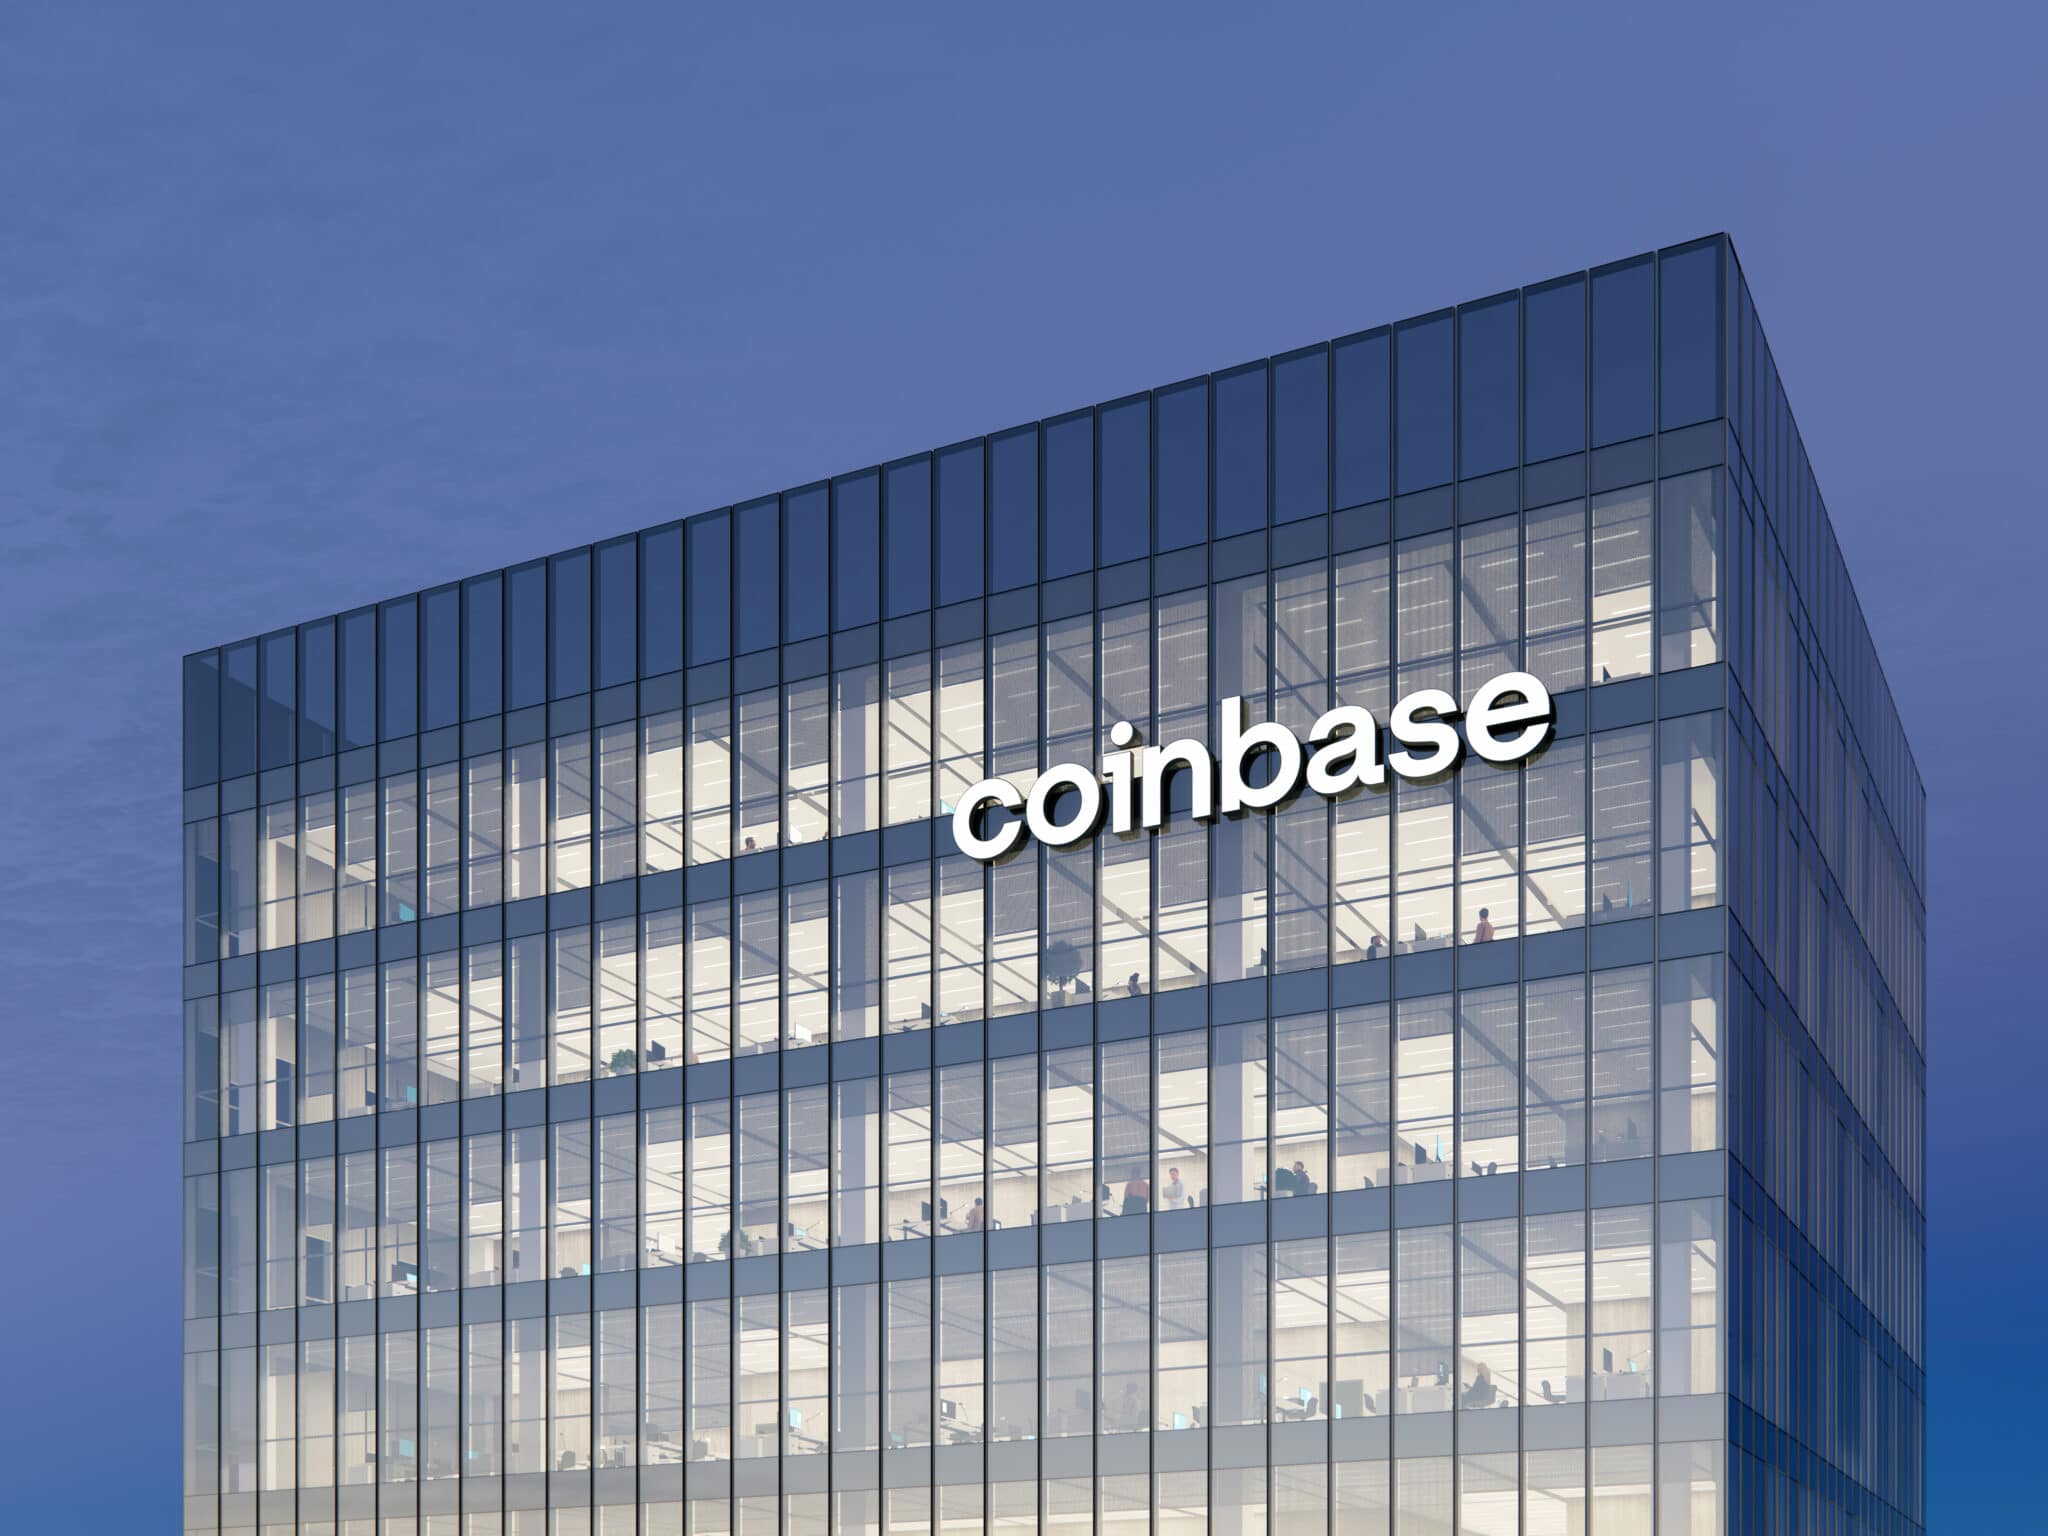 New York, United States. November 21, 2021, Editorial Use Only, 3D CGI. Coinbase Signage Logo on Top of Glass Building. Workplace Cryptocurrency Exchange Company Trading Office Headquarters.